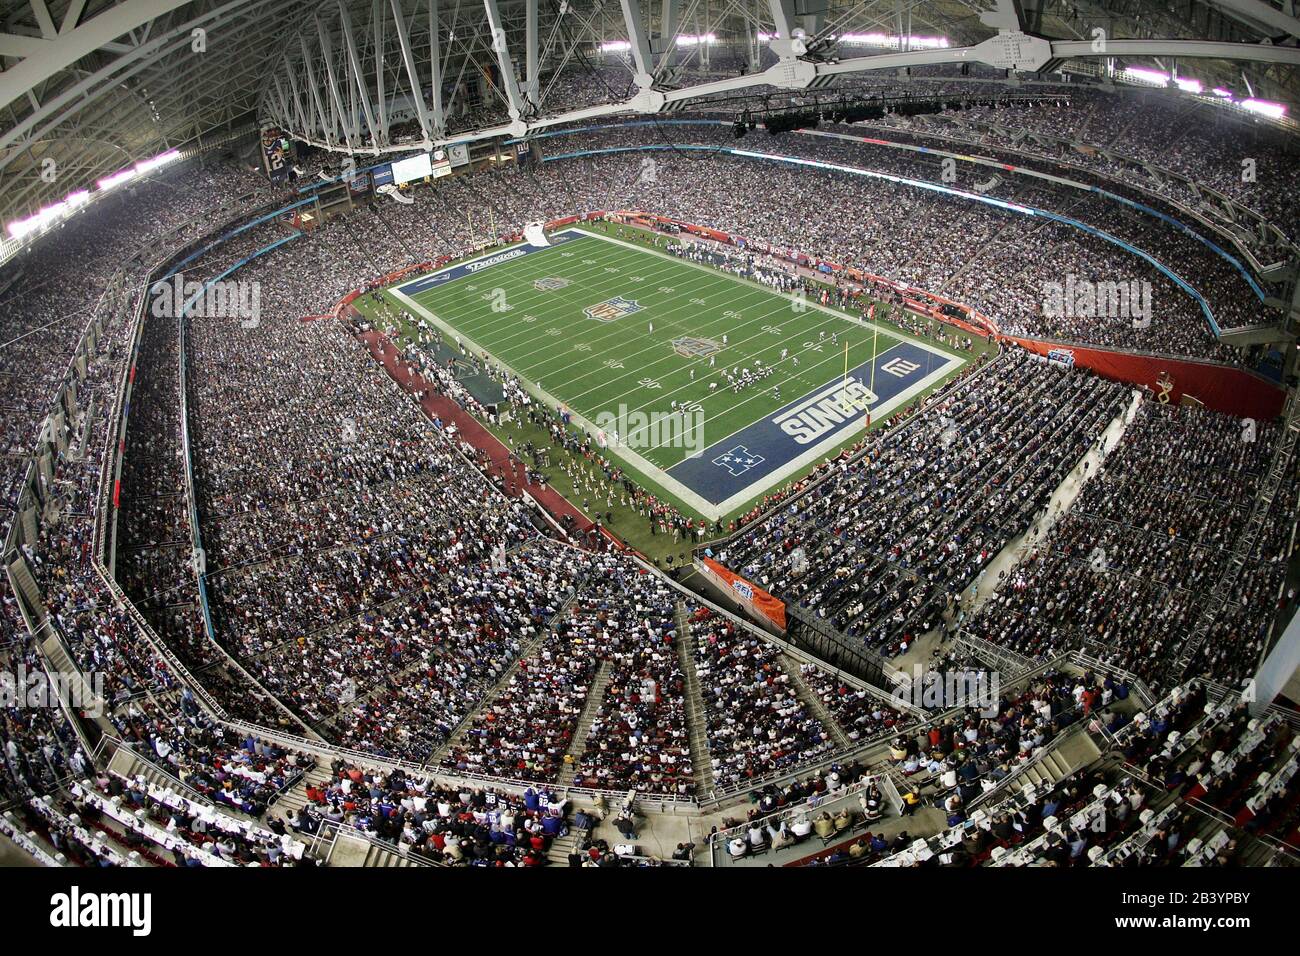 A view from the catwalk of Super Bowl XLII at University of Phoenix stadium in Glendale, AZ Stock Photo